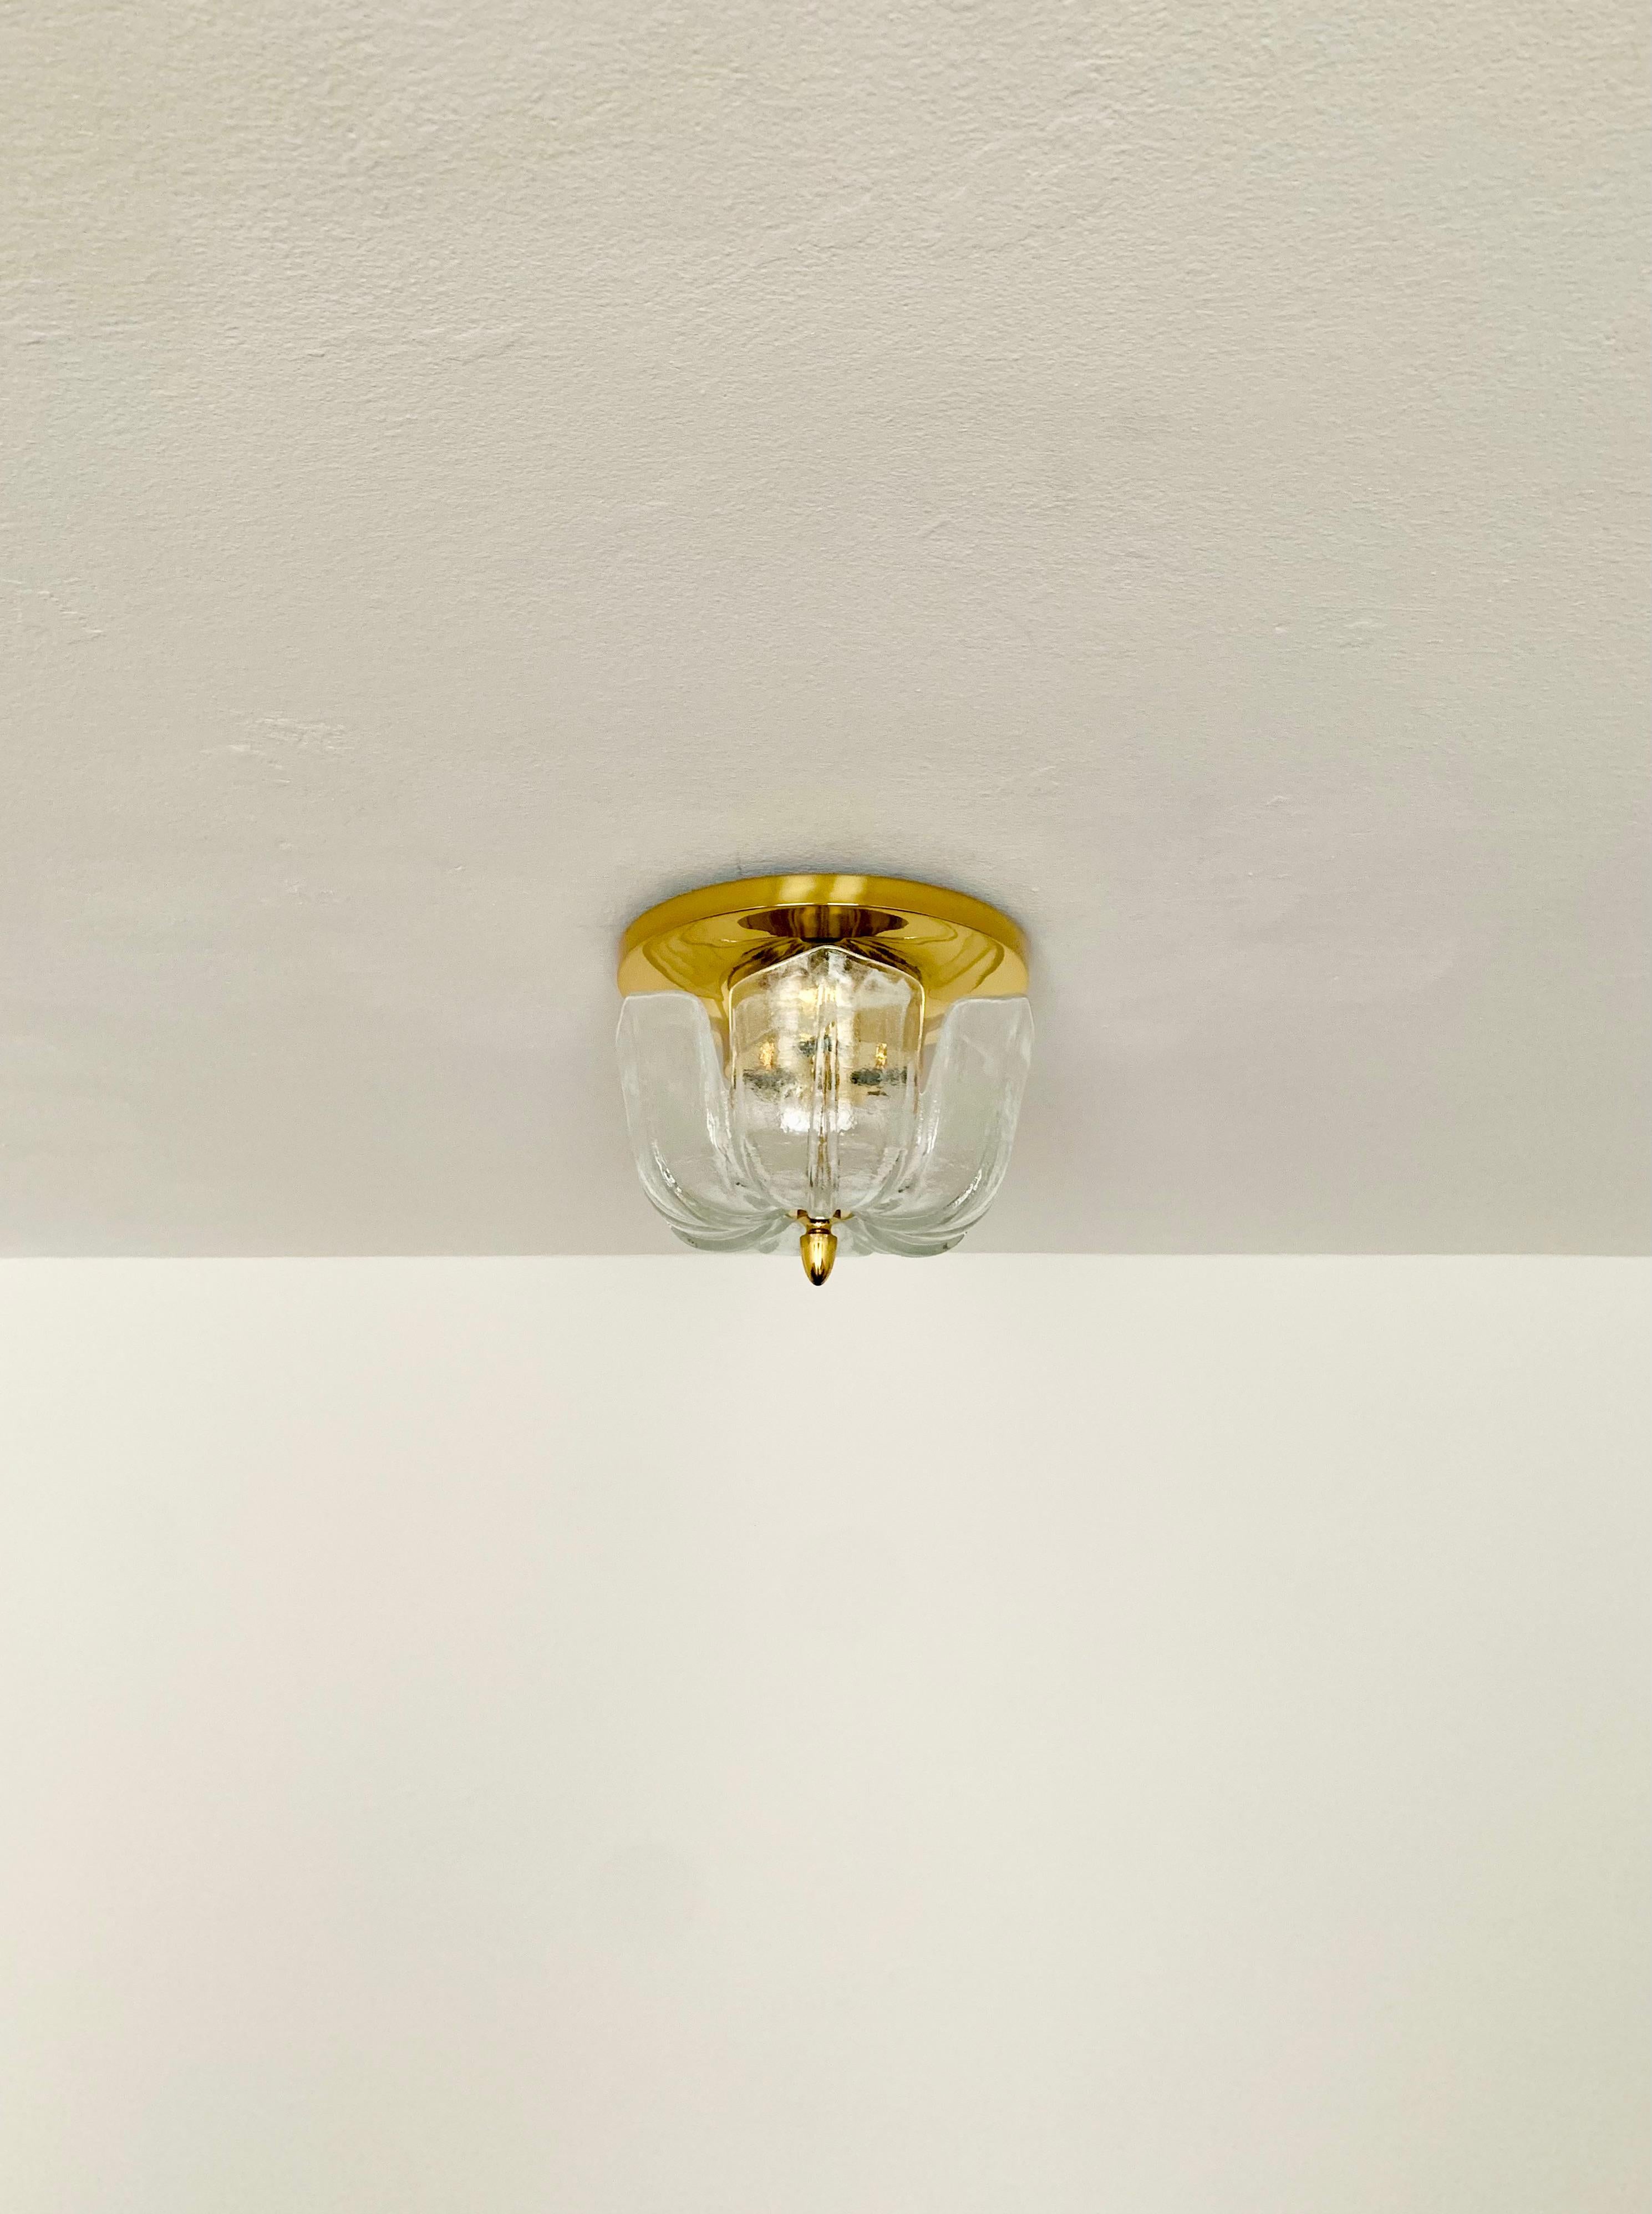 Very nice ceiling lamp from Glashütte Limburg.
The lamp spreads a great play of light in the room and enchants with its charisma.
Wonderful design and very high quality workmanship.

Manufacturer: Glashütte Limburg

Condition:

Very good